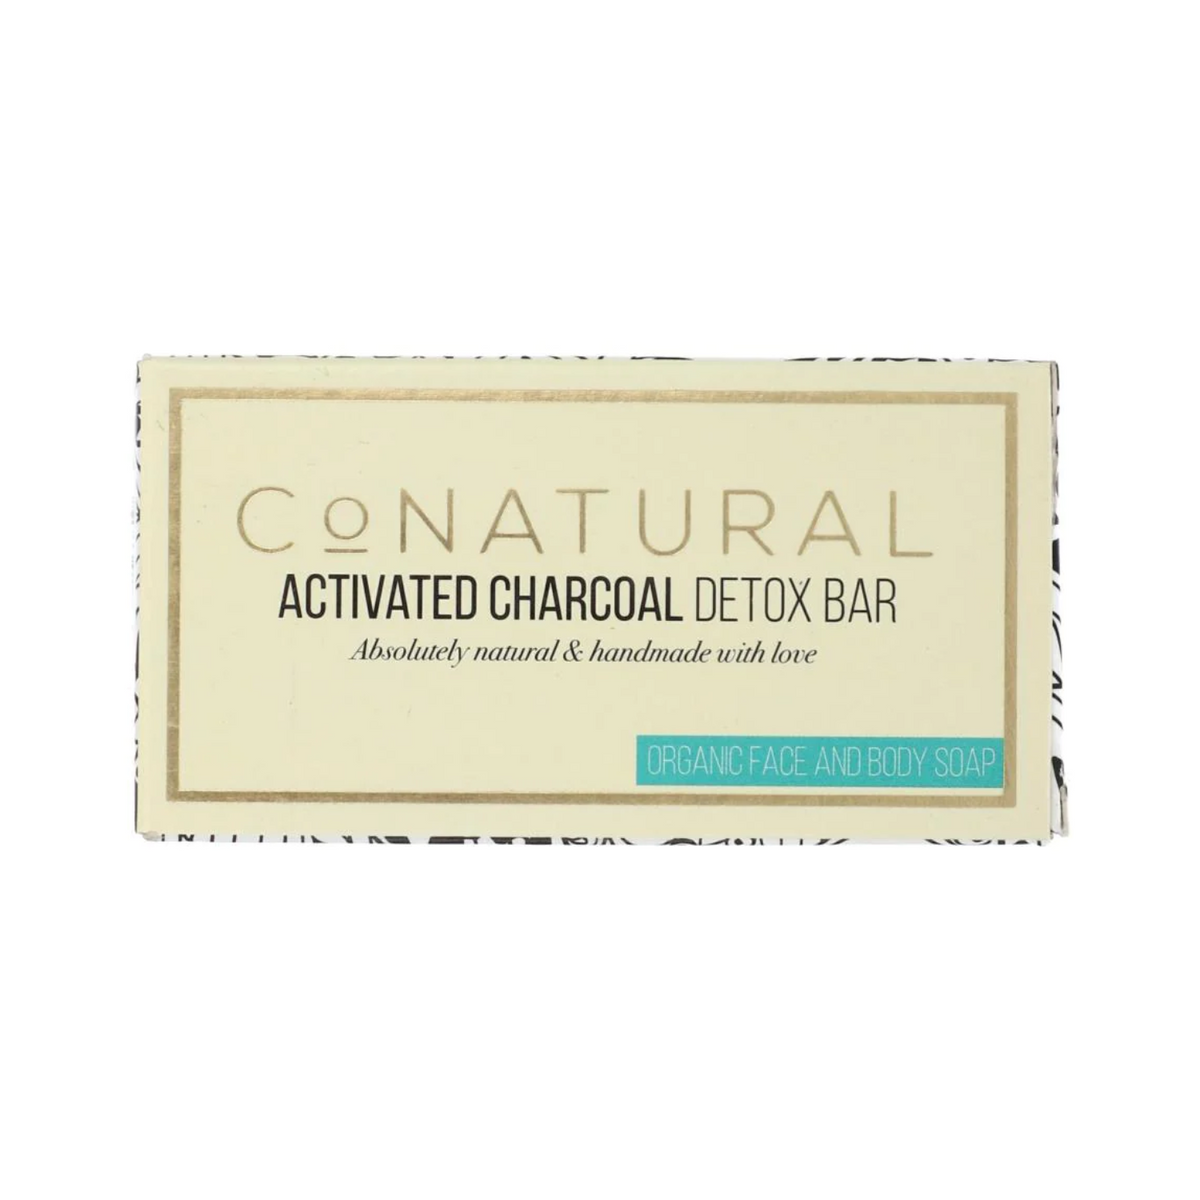 co-natural-activated-charcol-detox-bar-organic-face-and-body-soap-107g